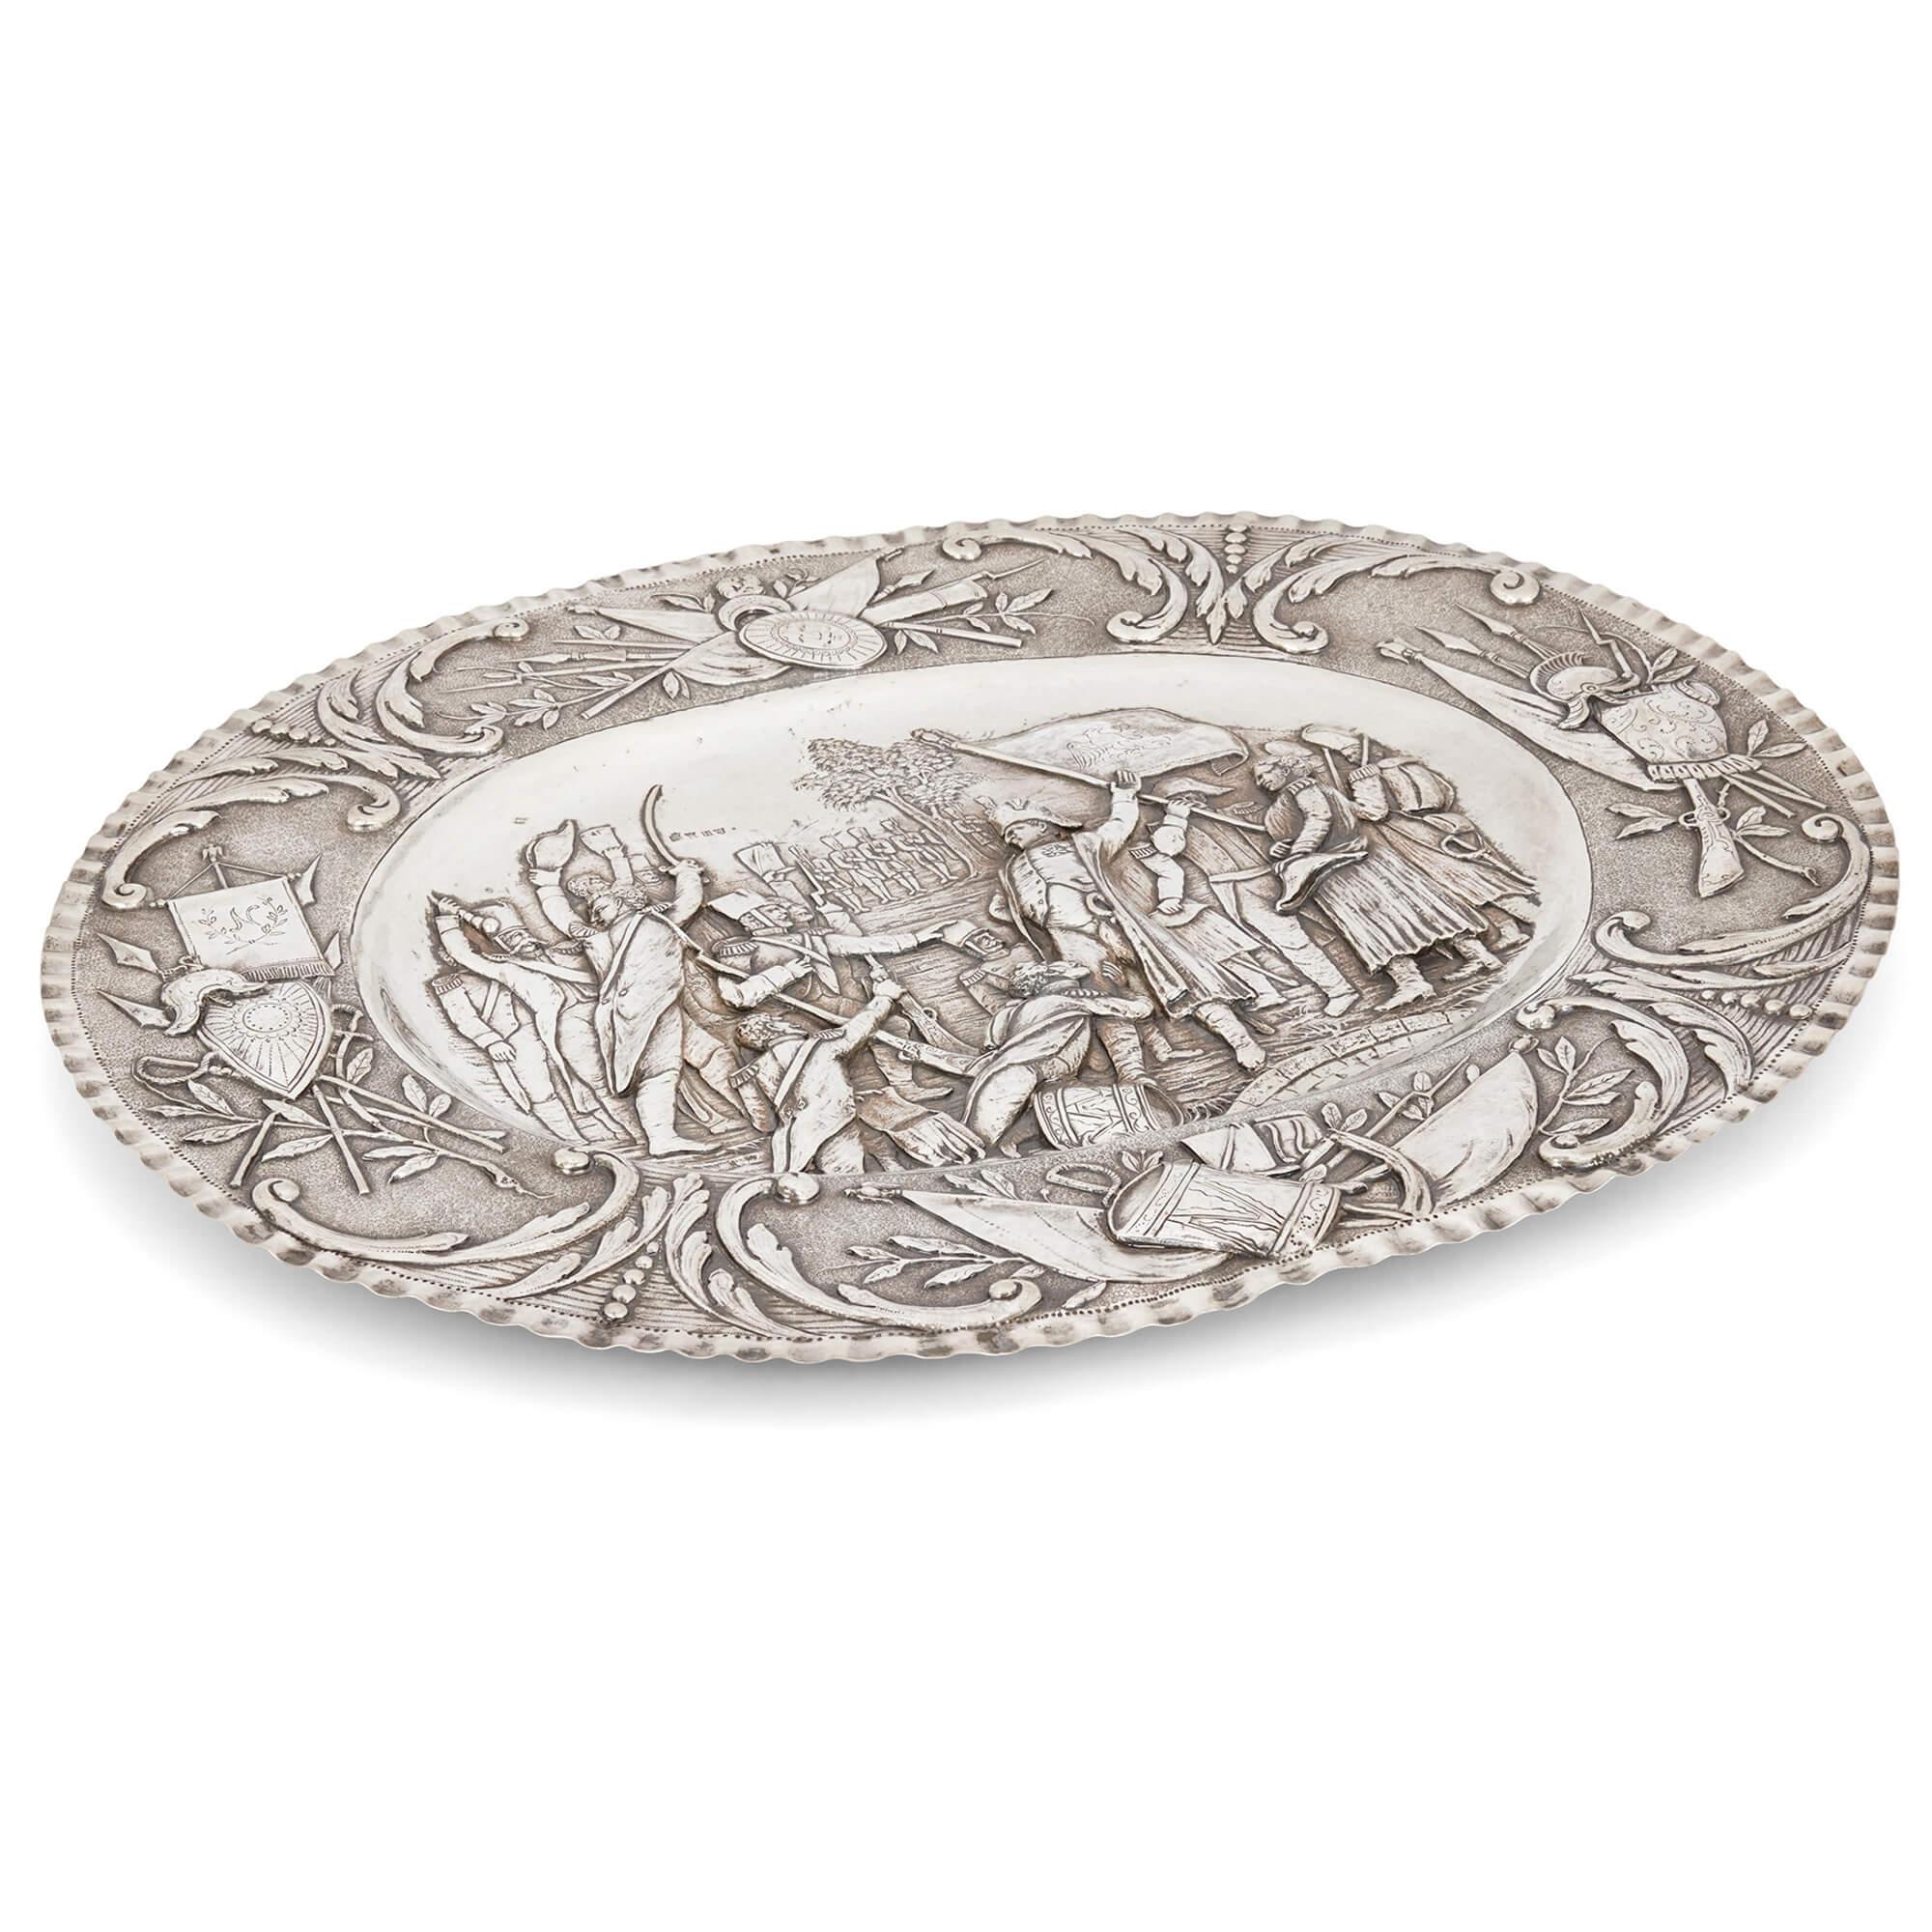 Oval-shaped silver tray by Georg Roth & Co. embossed with a Napoleonic scene
German, Late 19th Century 
Height 3cm, width 57.5cm, depth 47.5cm, weight 1.87kg

This superb piece of silverware depicts Napoleon’s return from the island of Elba in 1815,